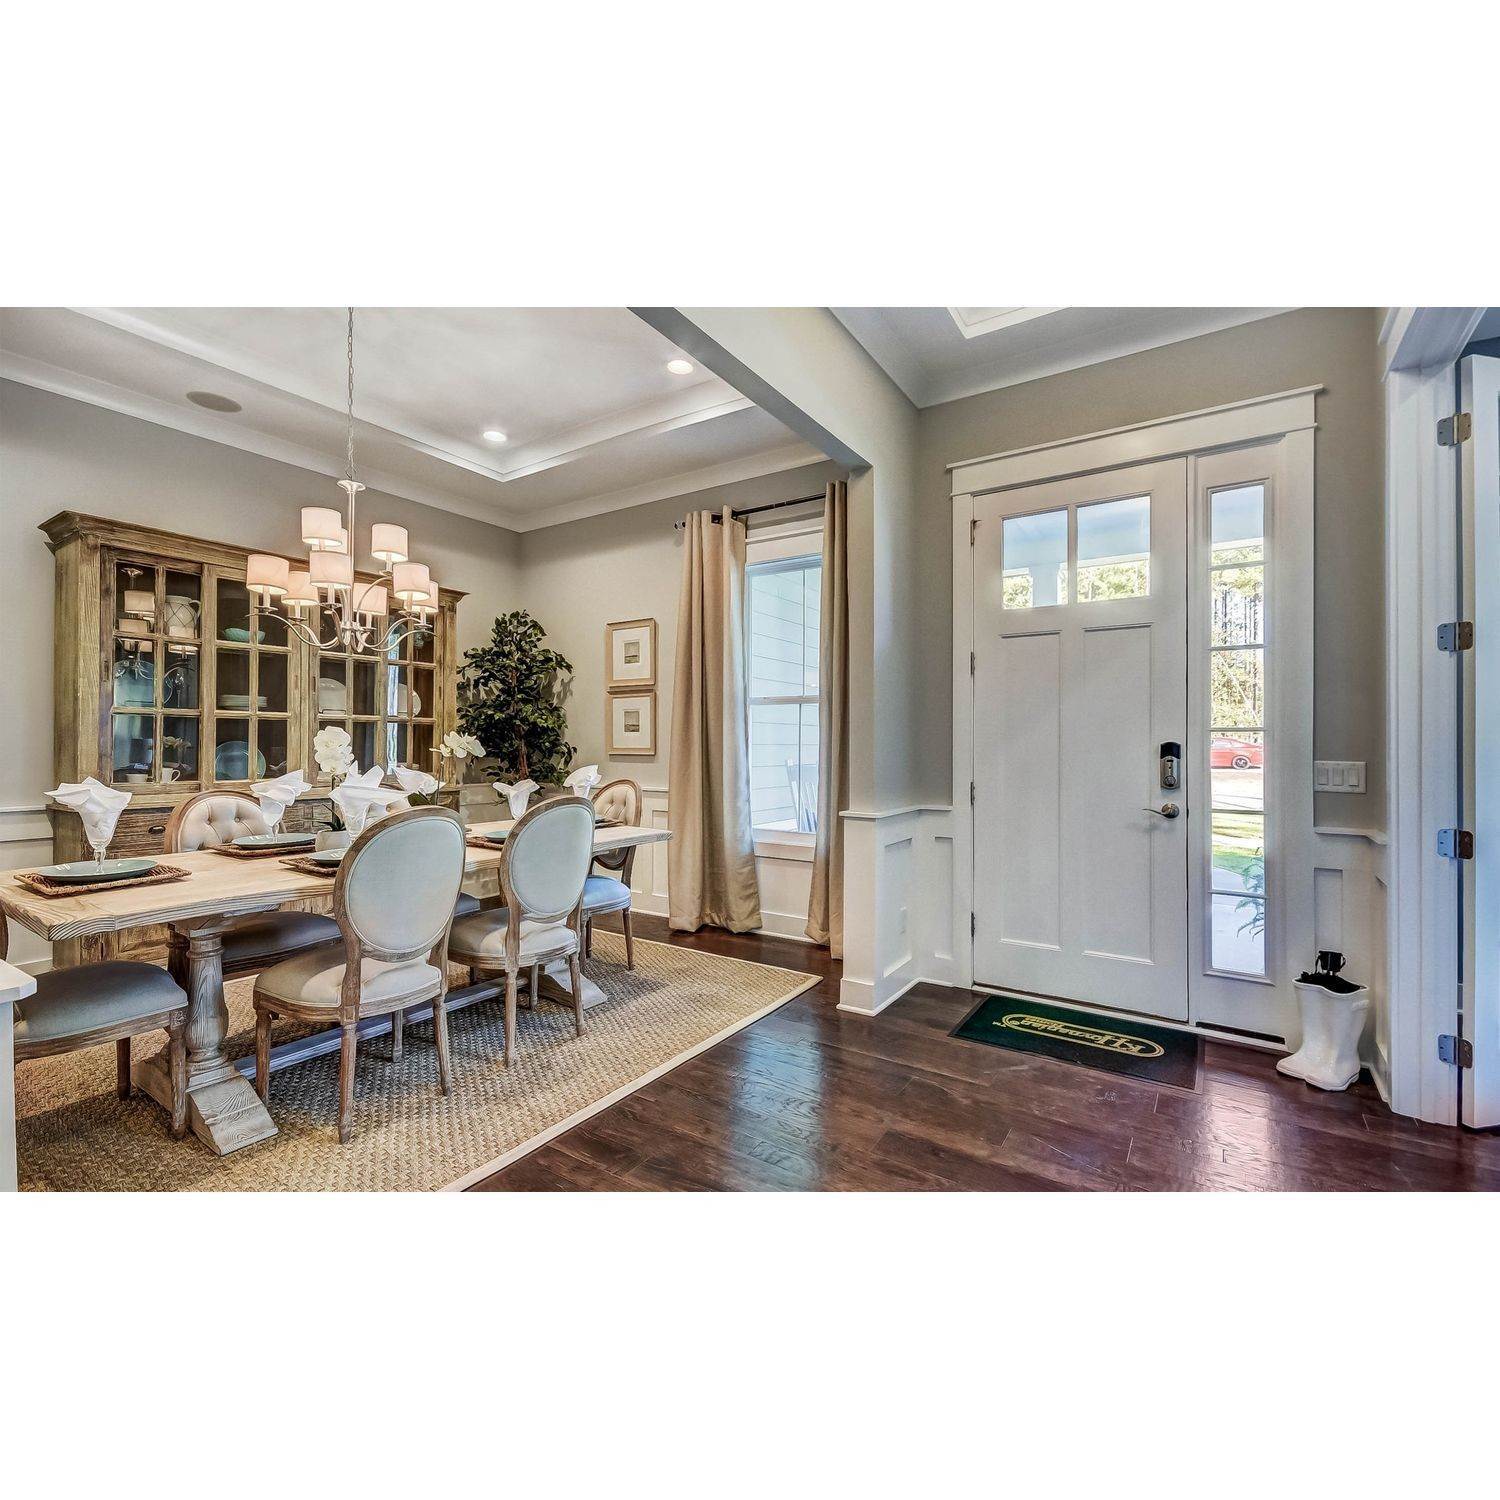 22. Single Family for Sale at K. Hovnanian's® Four Seasons At Kent Island - Sing 203 Bayberry Drive, Chester, MD 21619